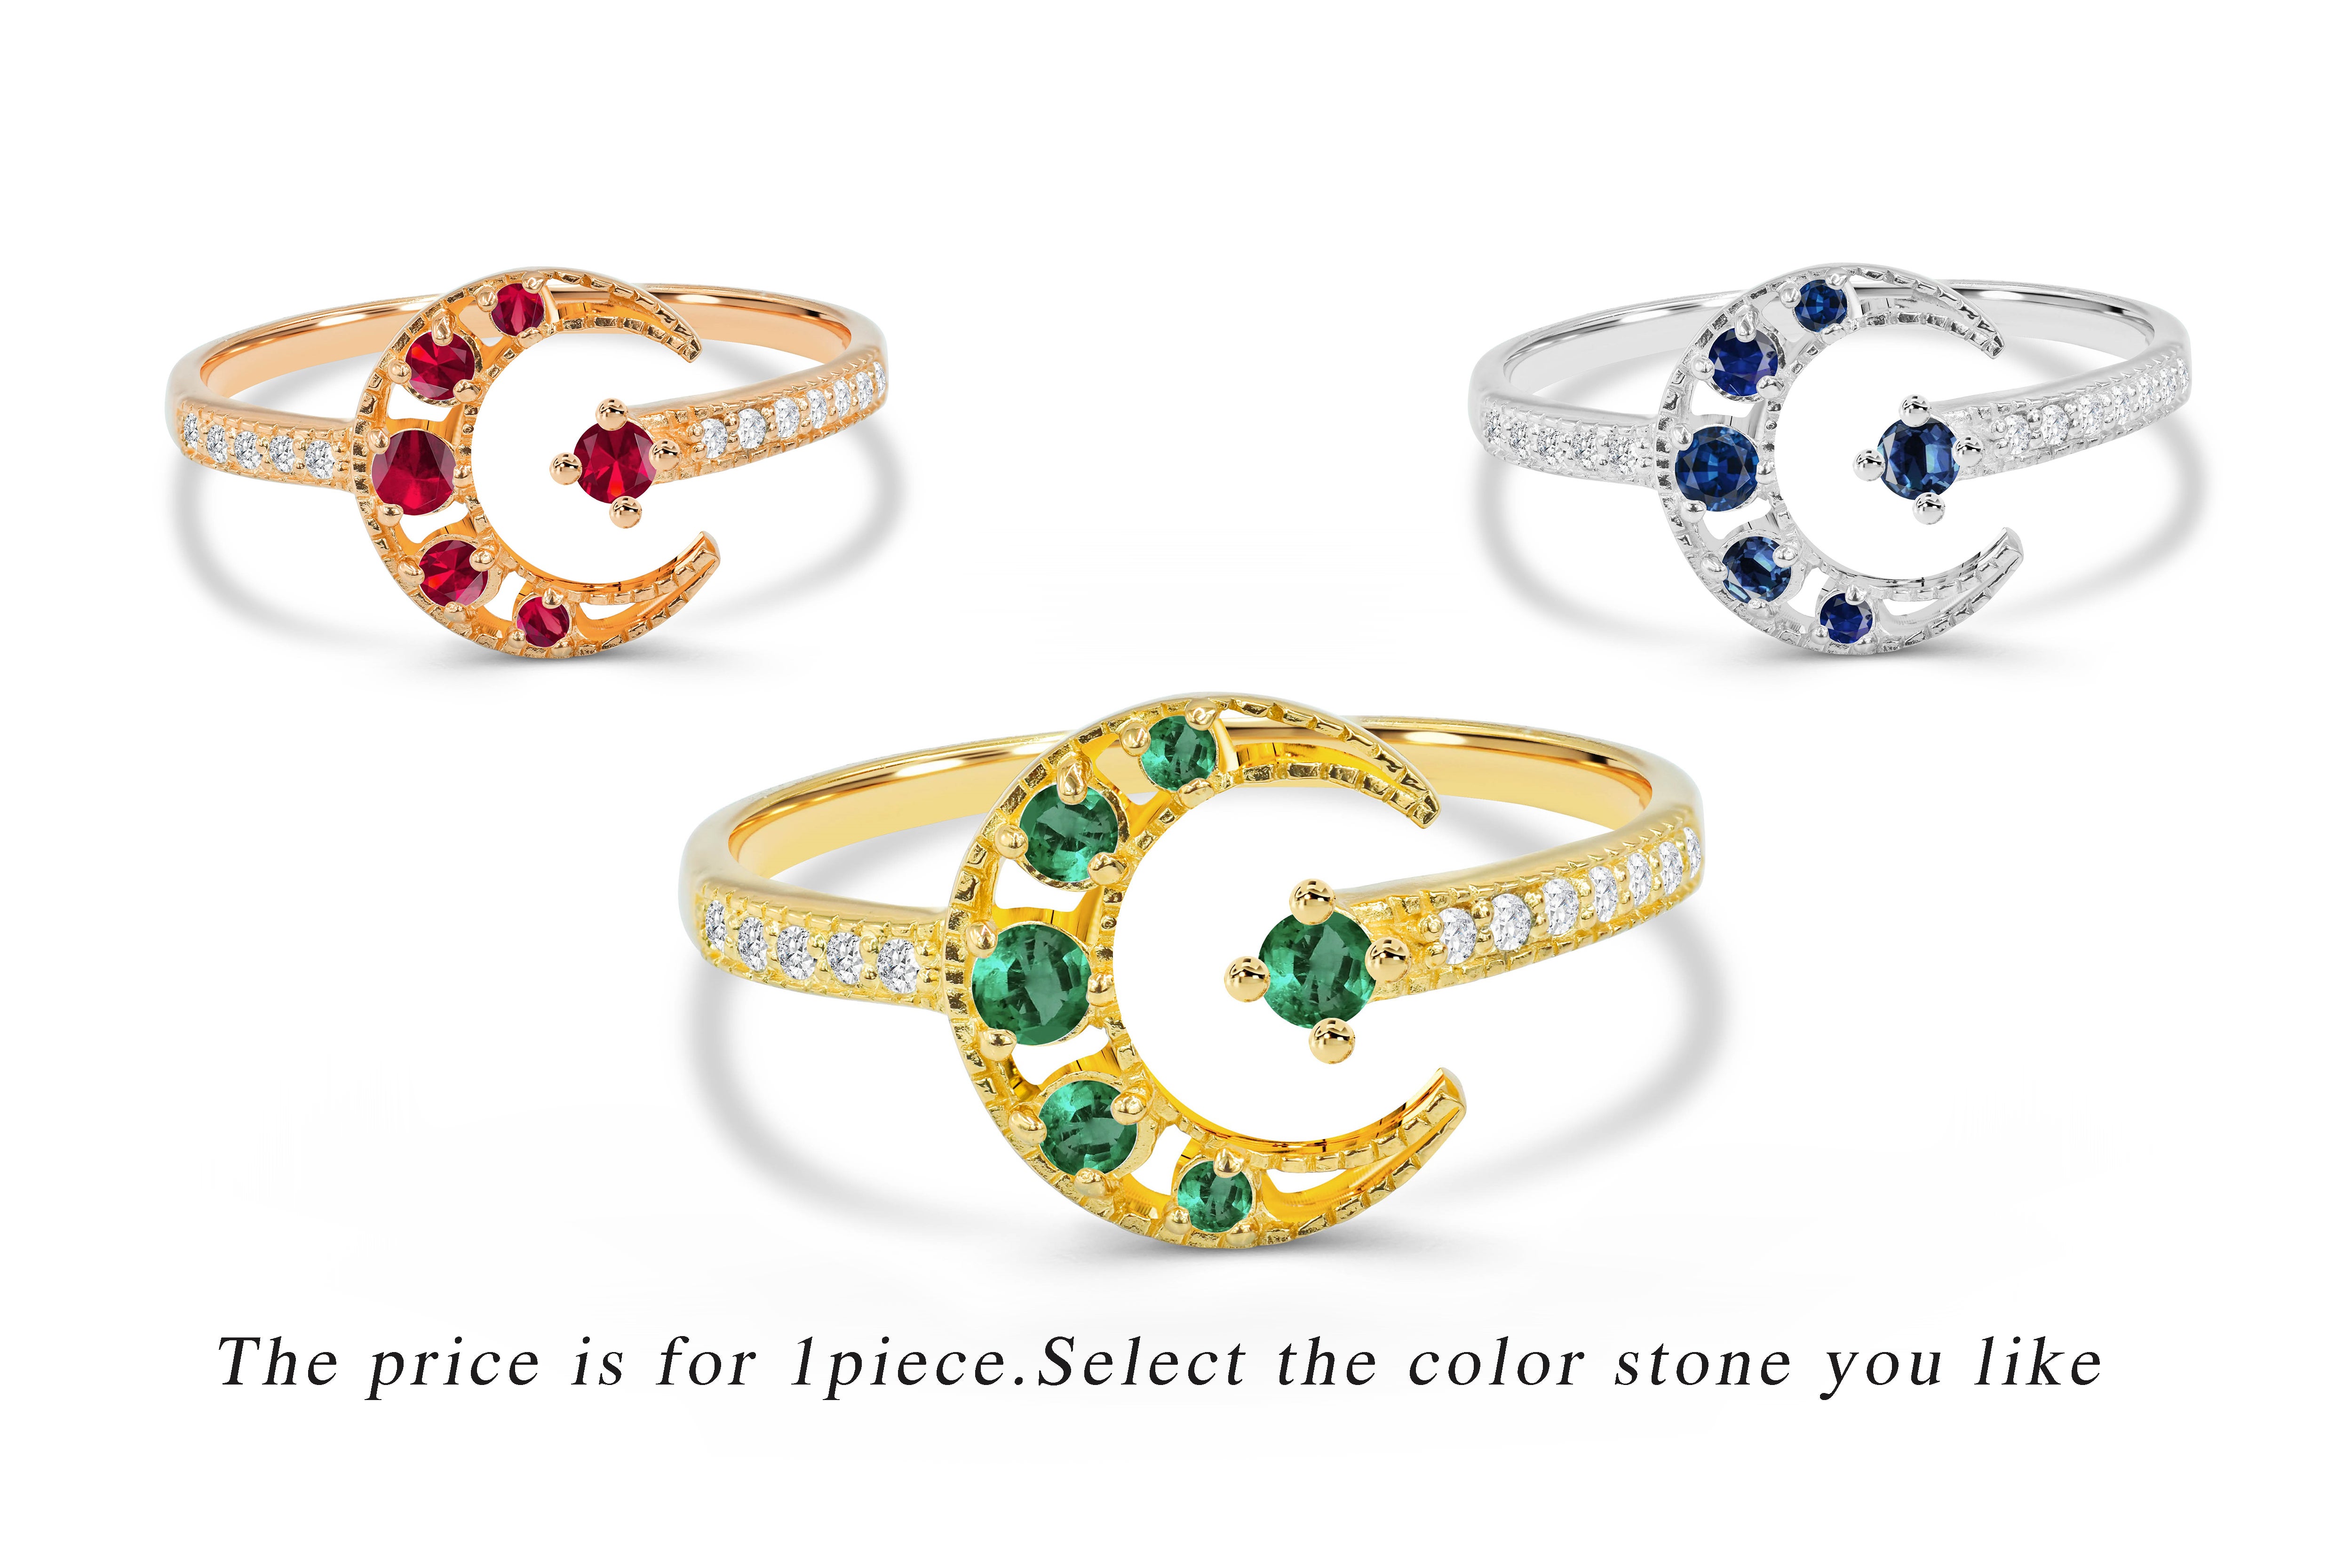 For Sale:  0.31 Ct Emerald, Ruby and Sapphire Crescent Moon Diamond Ring in 18K Gold